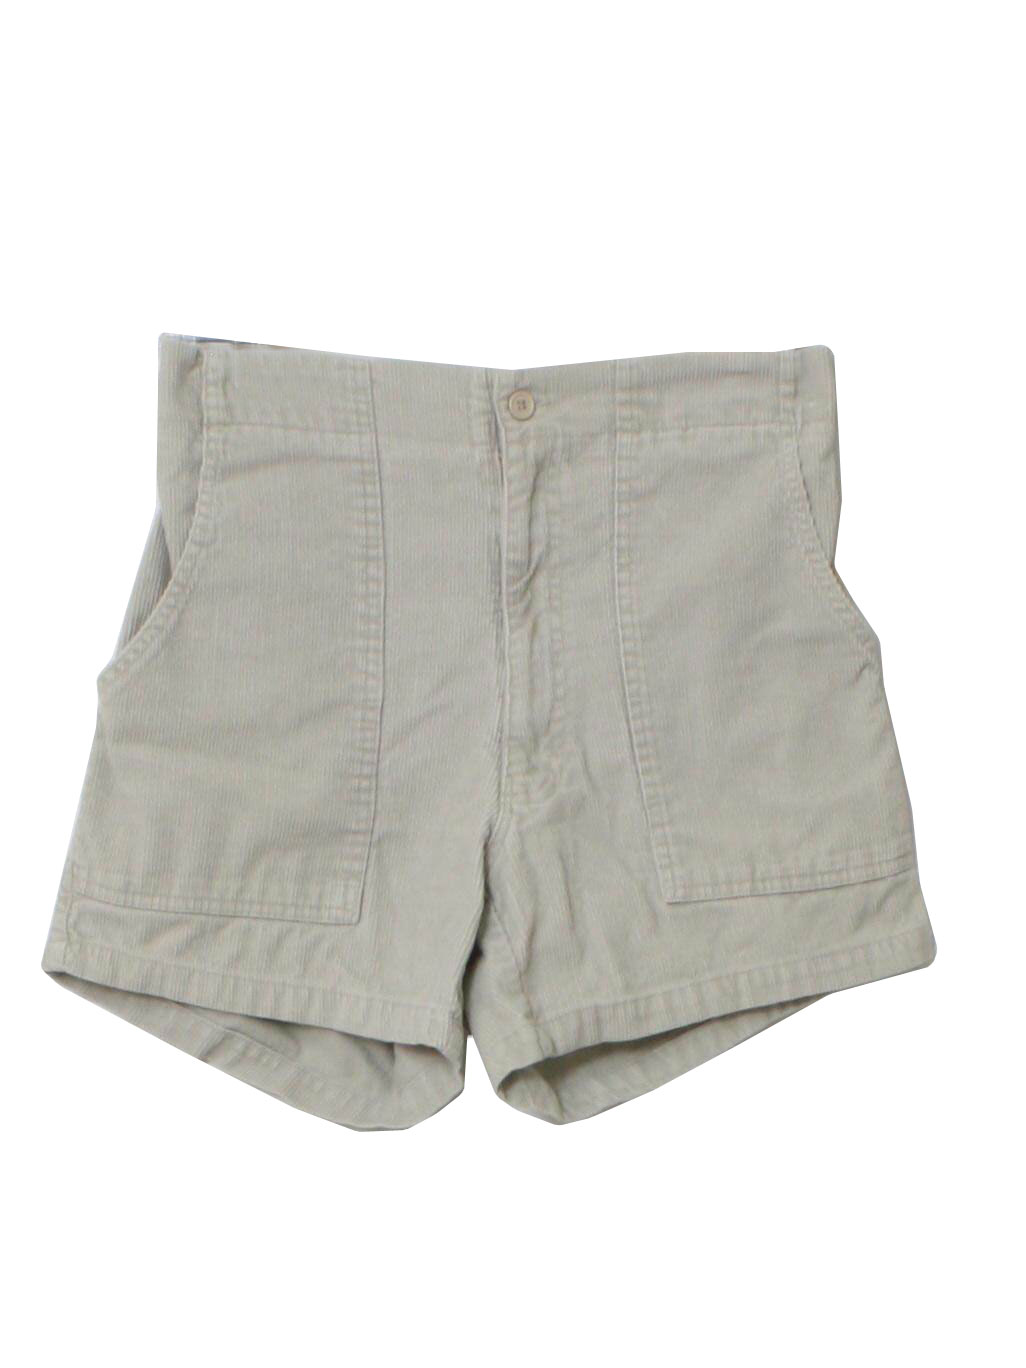 Towncraft 80's Vintage Shorts: 80s -Towncraft- Mens light grey cotton ...